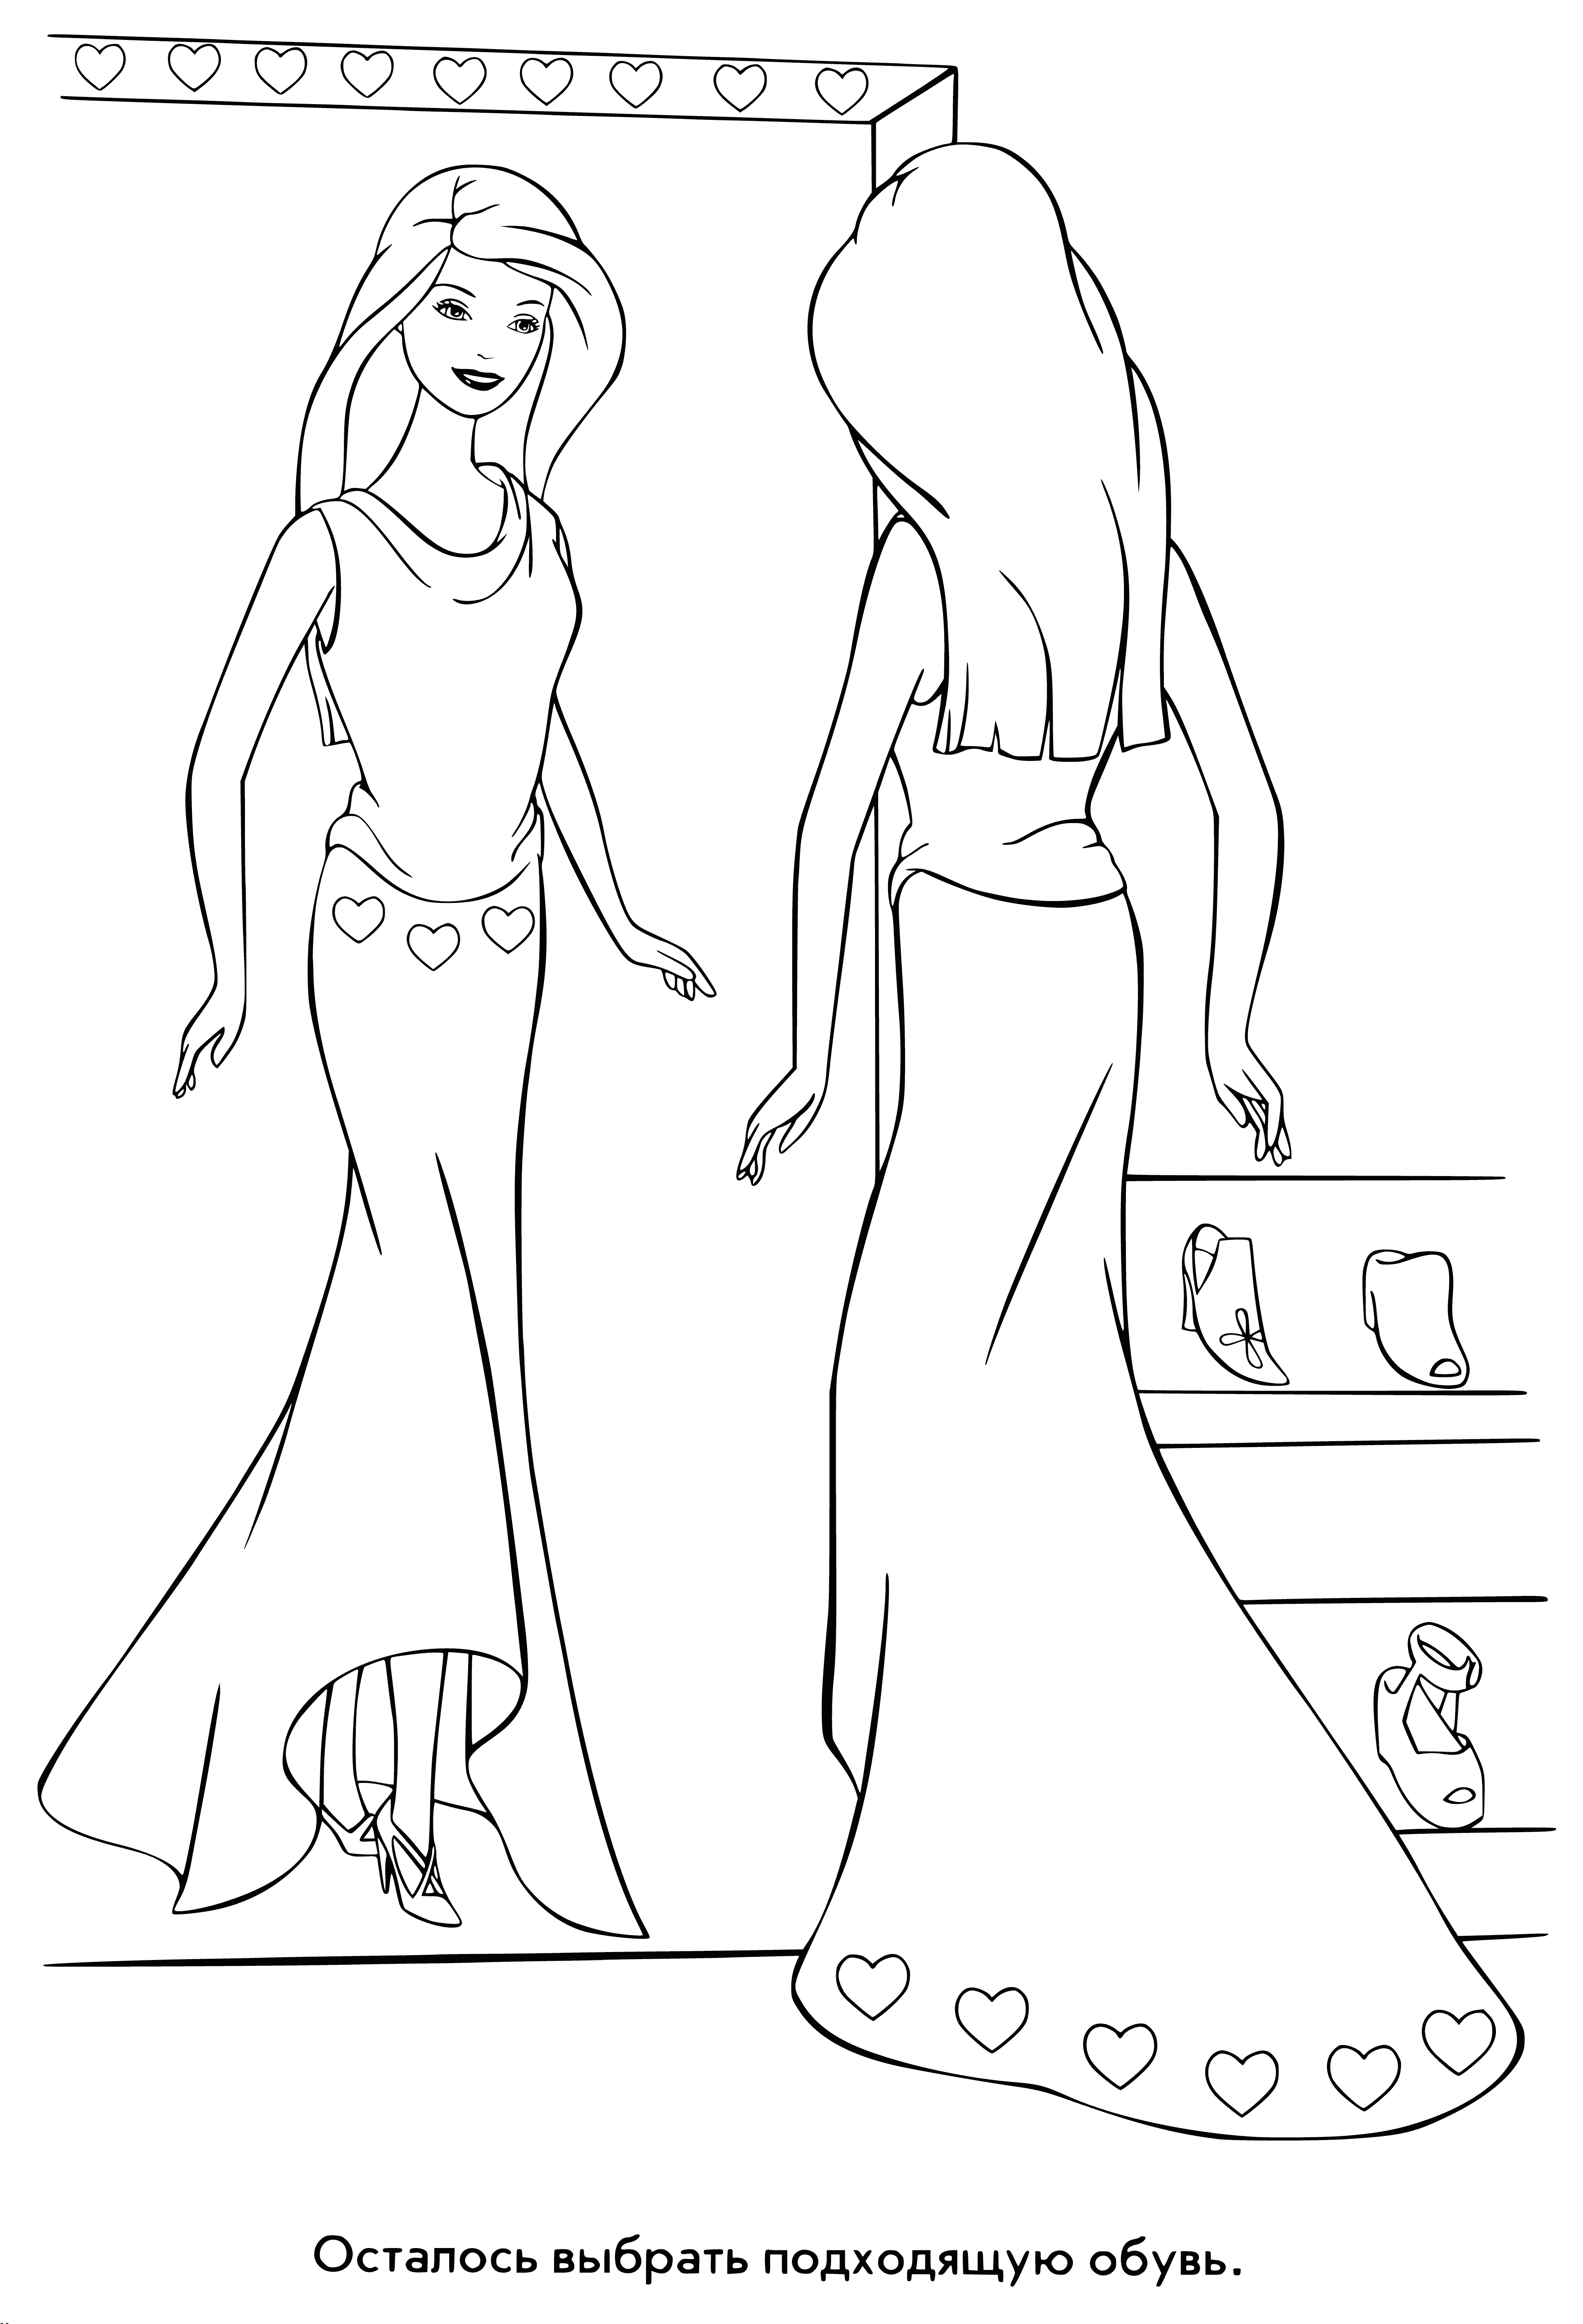 coloring page: Girl reaches for pair of shoes from store shoe rack.